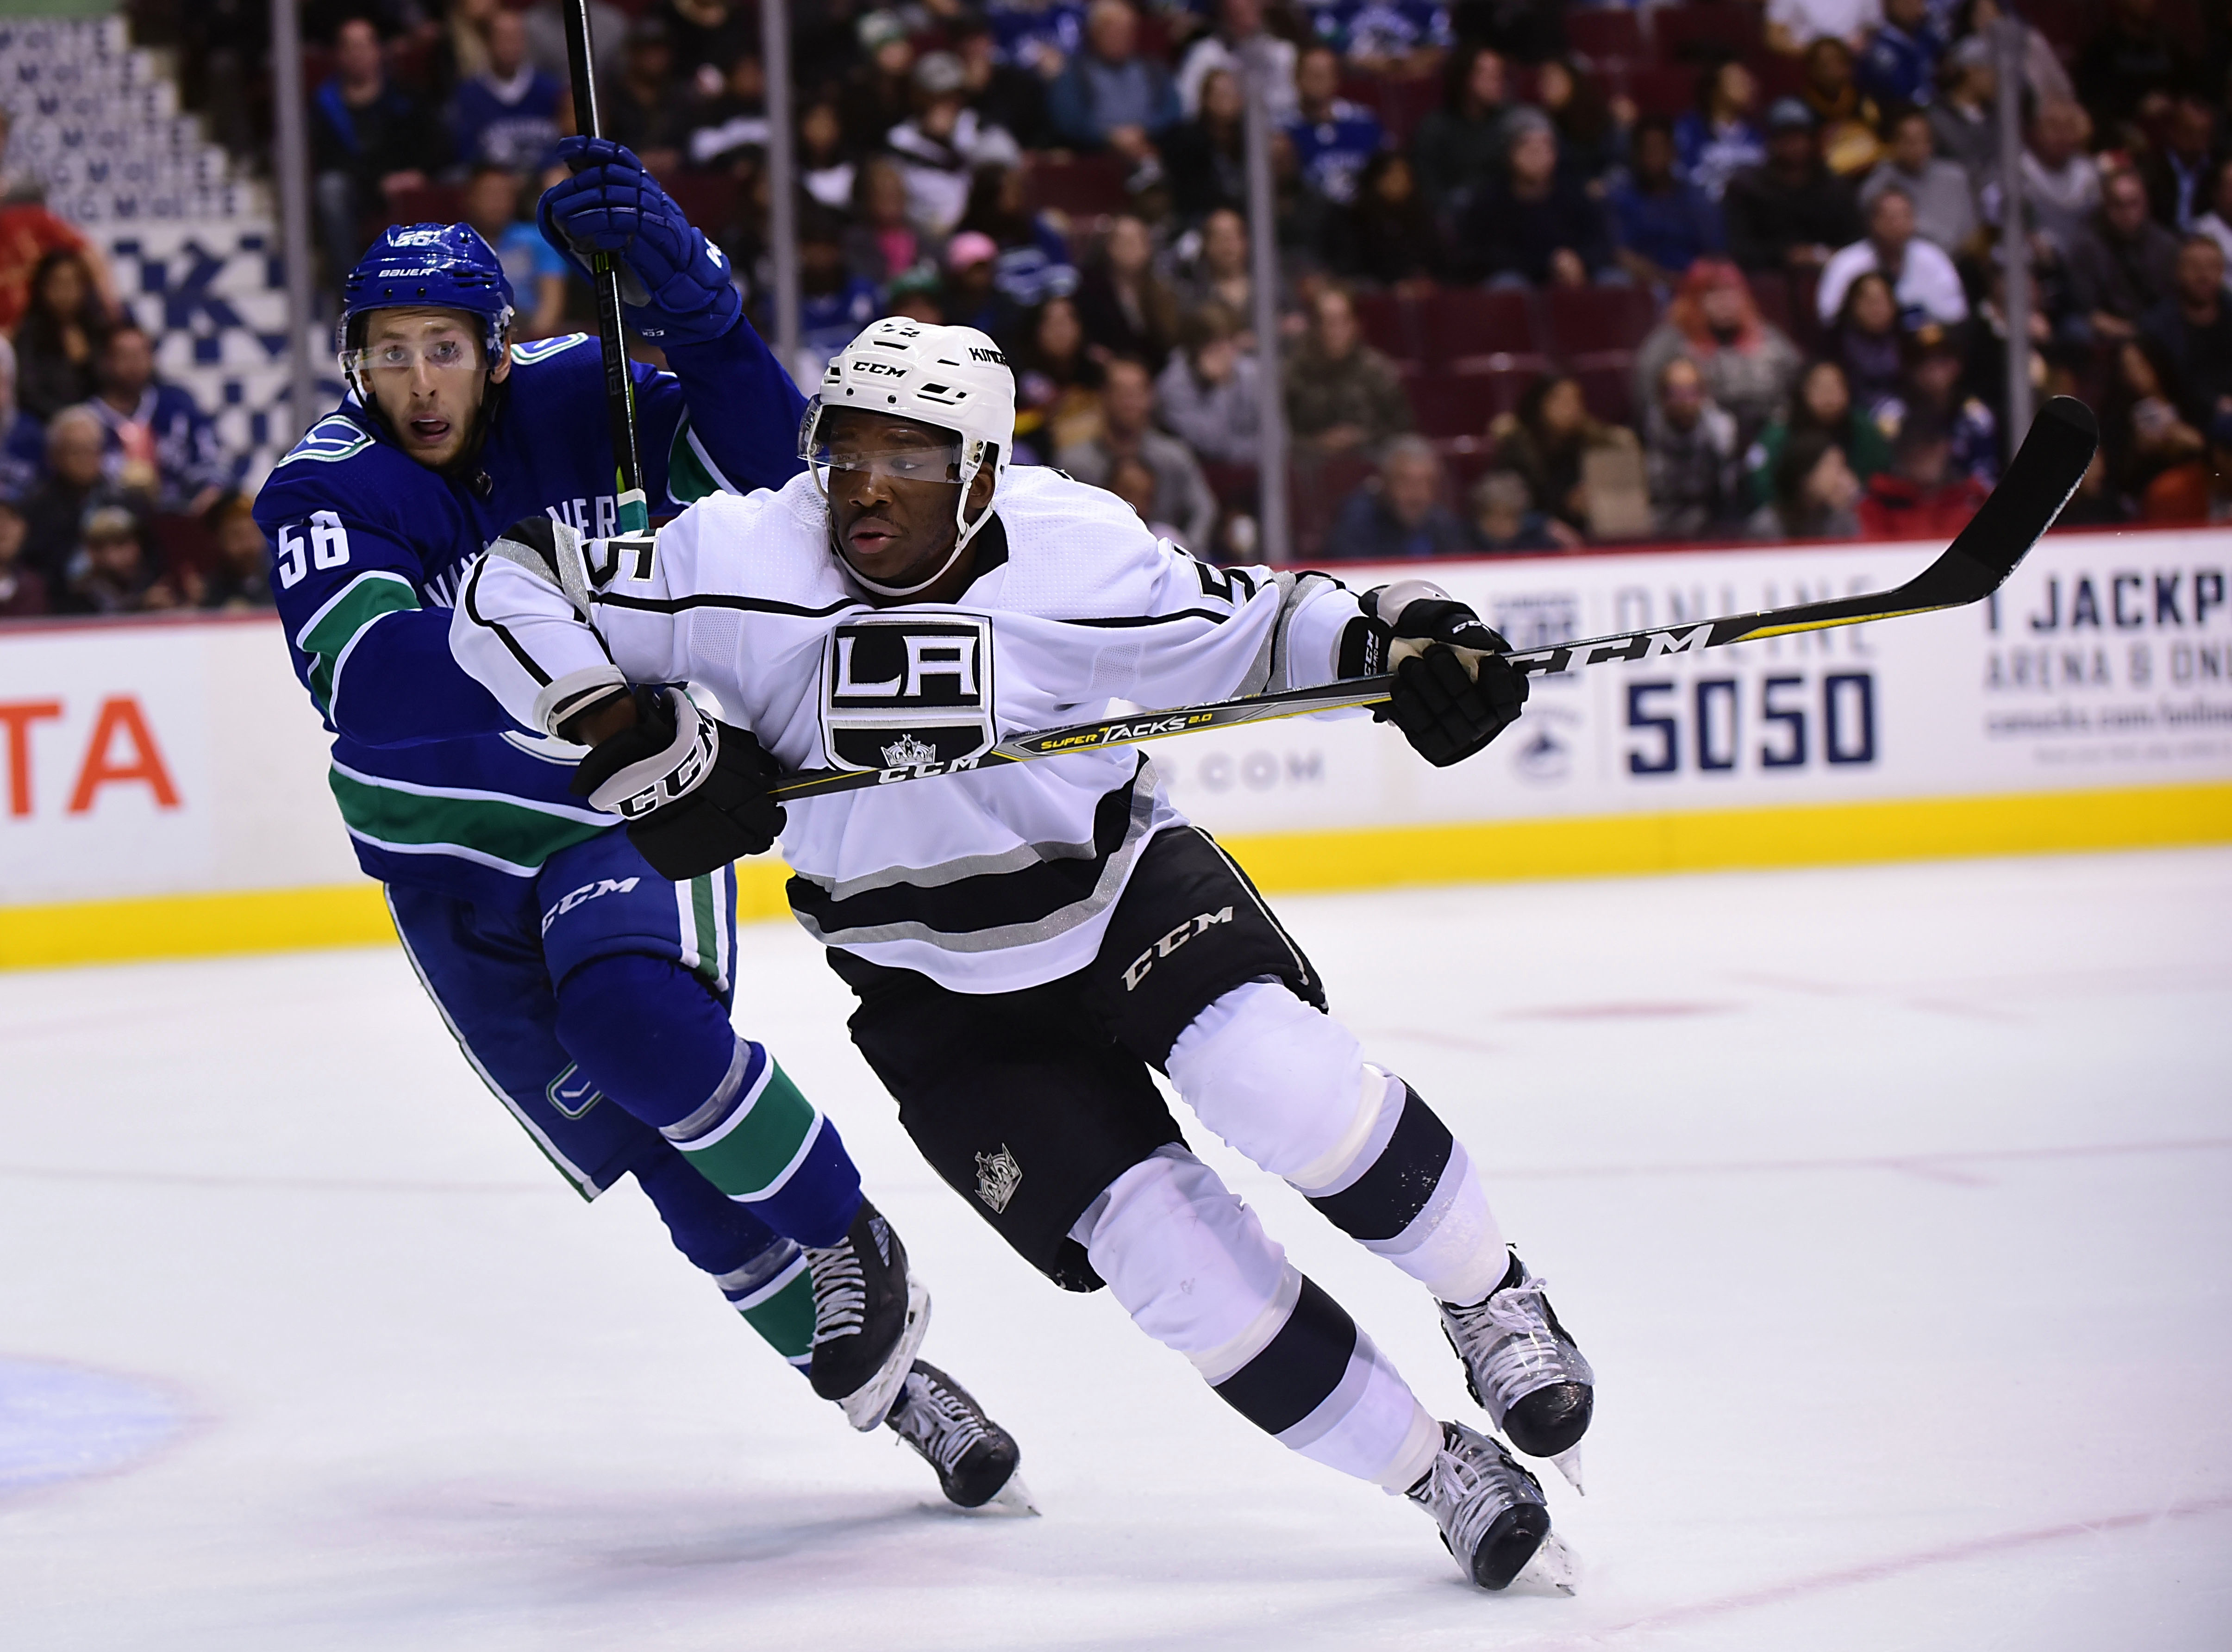 Sep 20, 2018; Vancouver, British Columbia, CAN; Los Angeles Kings forward Boko Imama (55) skates against Vancouver Canucks defenseman Guillaume Brisebois (56) during the second period at Rogers Arena.